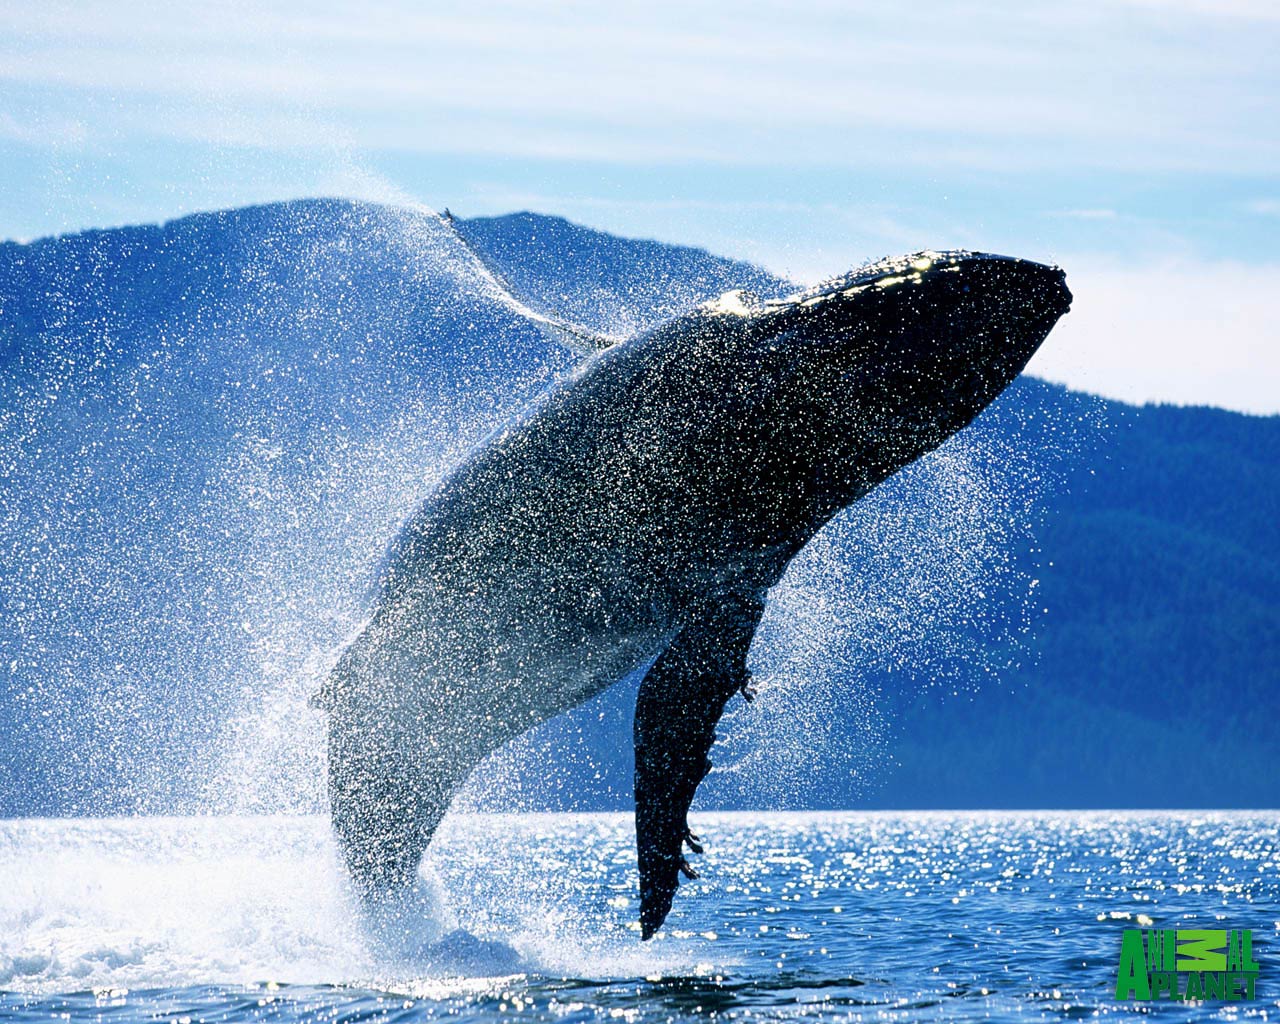 Humpback whale playfully swimming in clear blue ocean while blowing bubbles   Windows Spotlight Images